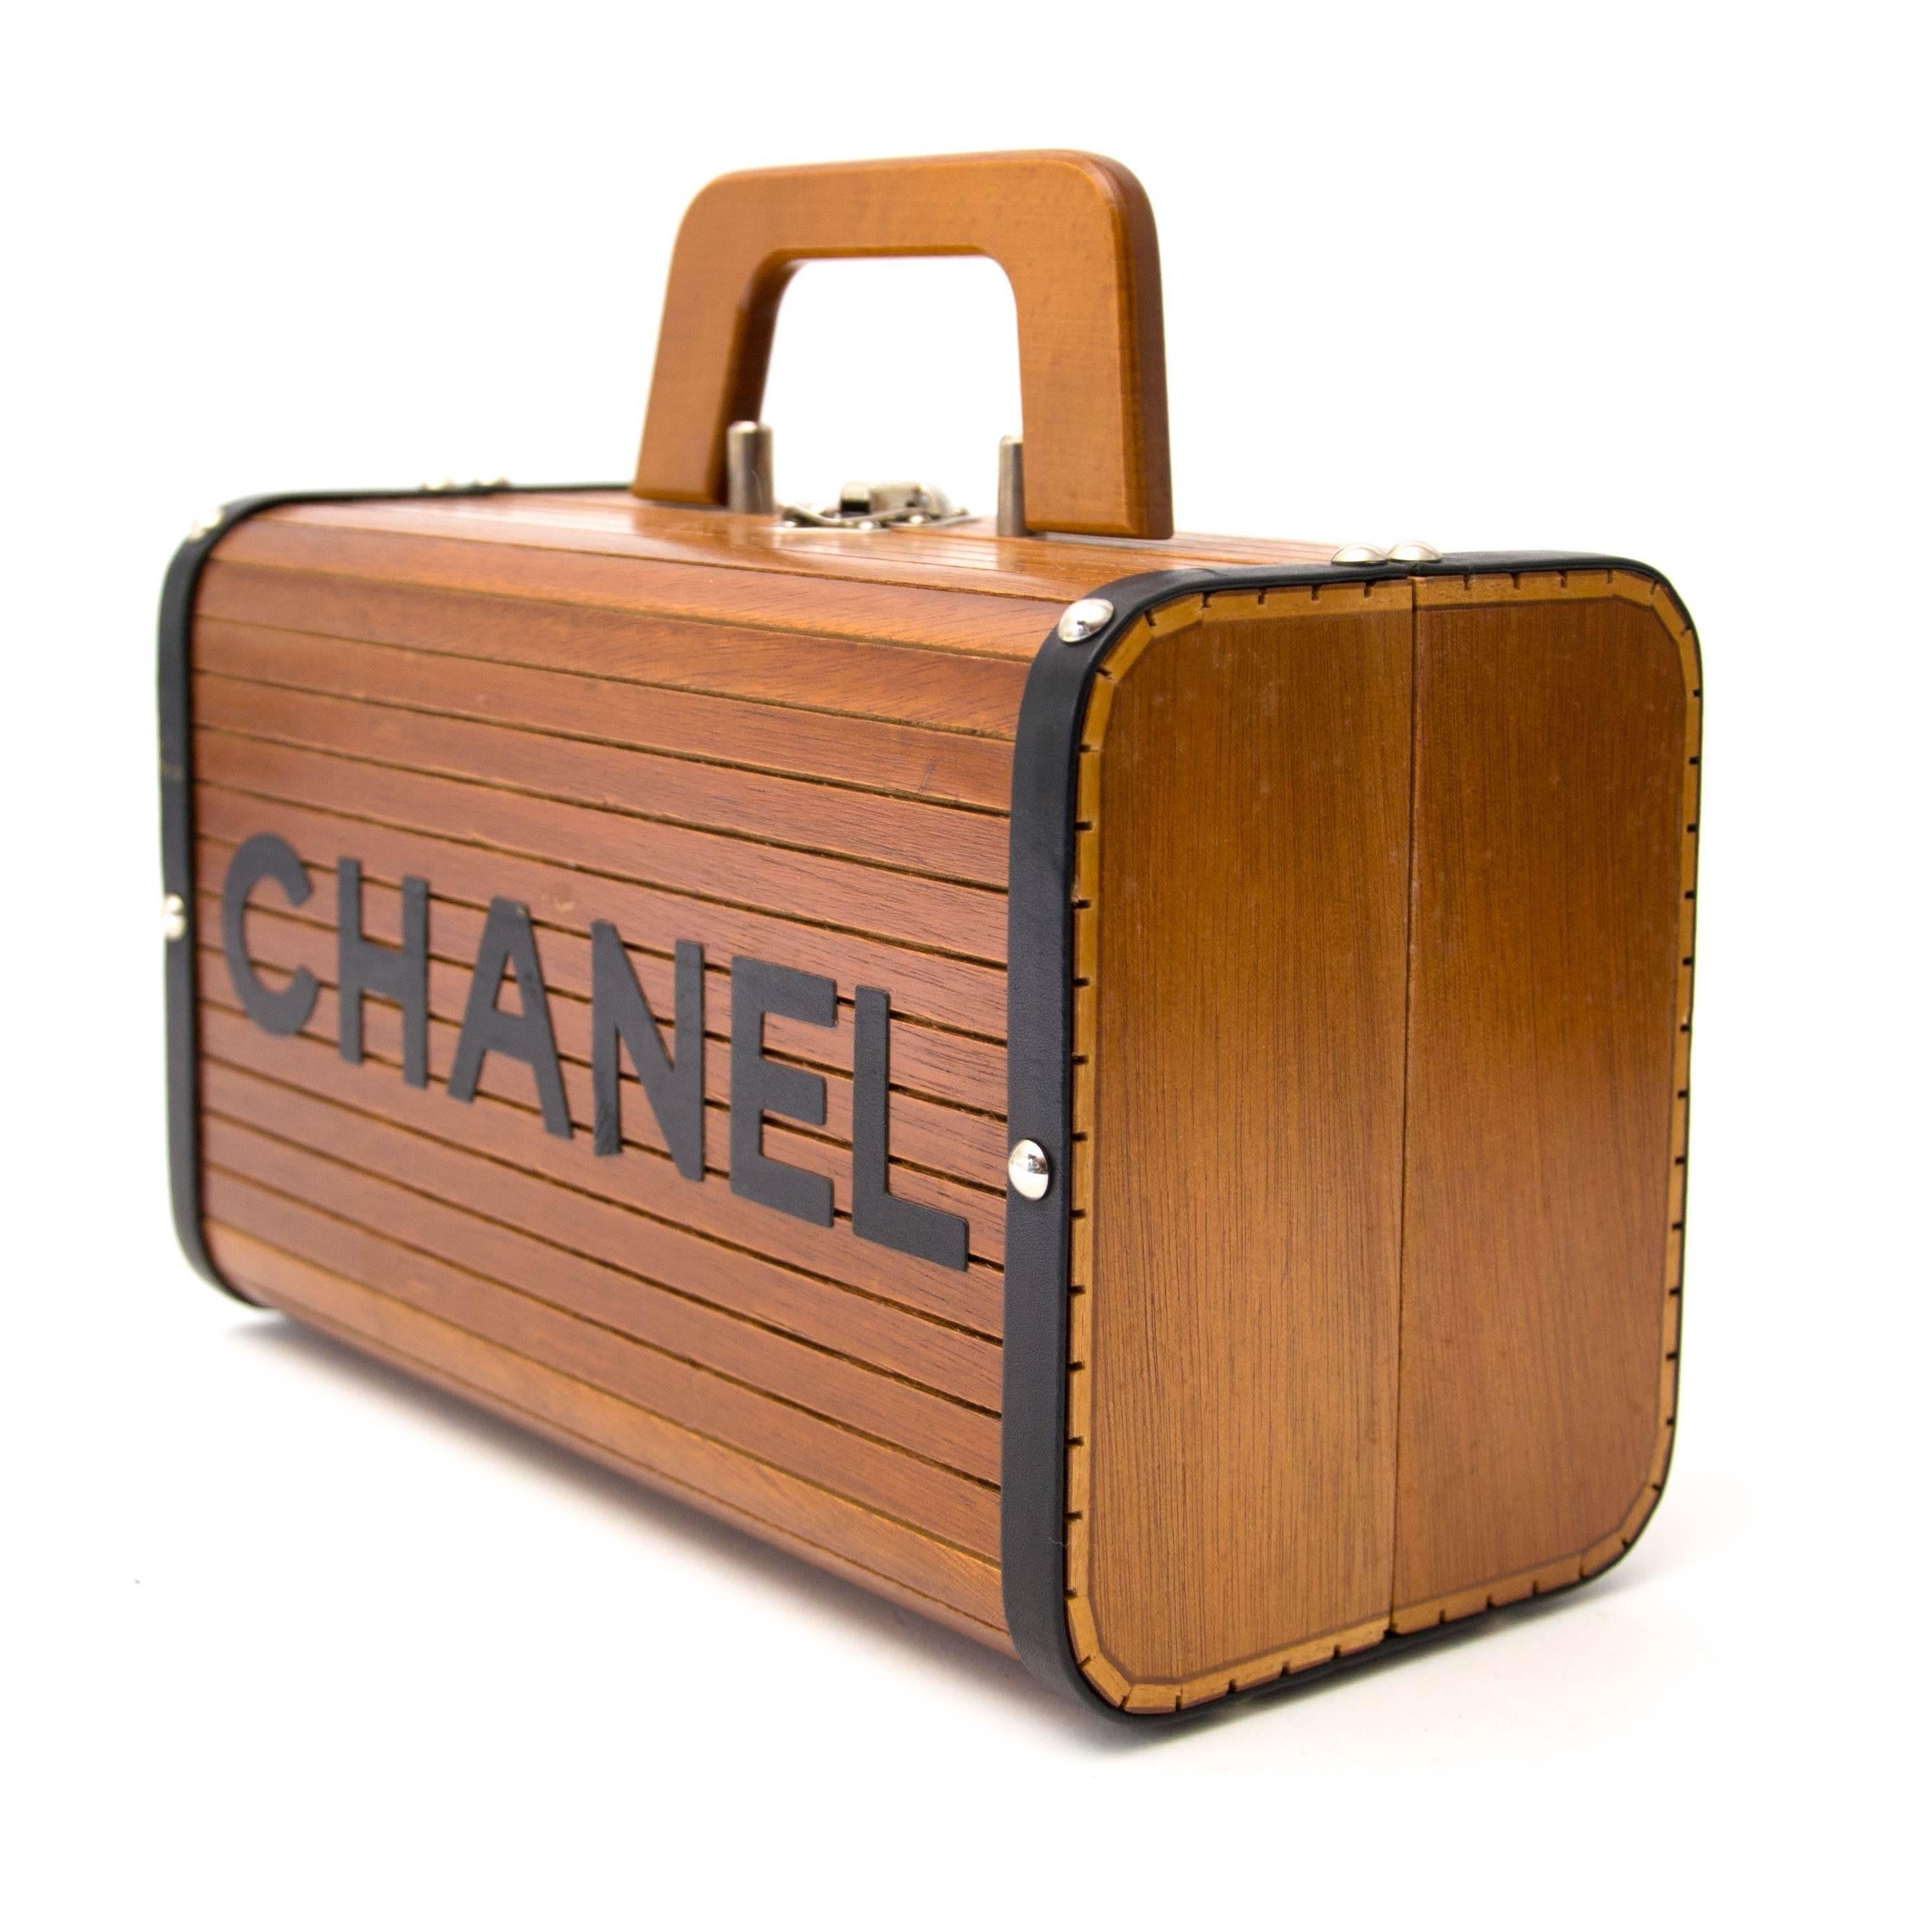 A real eyecatcher this limited vintage Chanel Wooden Trunk case from the 1996 collection.
Structured with smooth wood panels,  supple leather trim and logo lettering at the front and back.
Under a sleek wooden handle sits a buckle closure, which